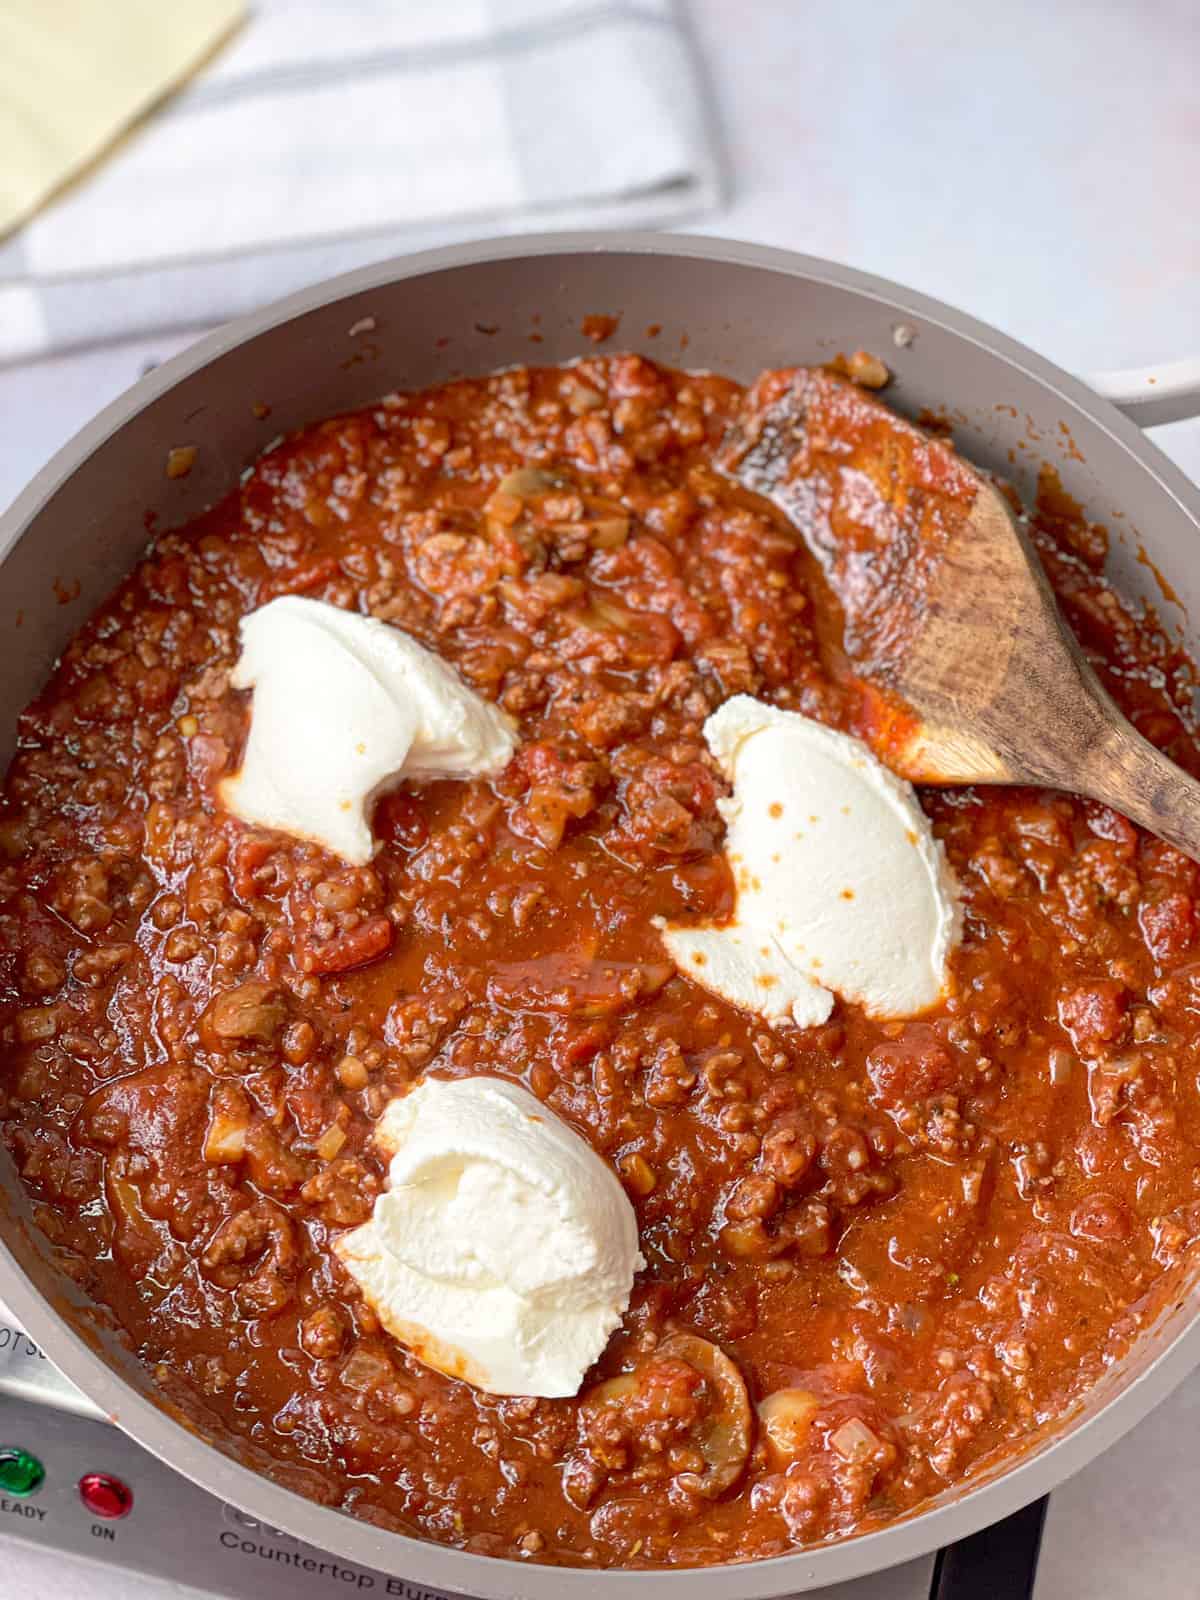 A cooking pan filled with red sauce, minced meat, and ricotta cheese